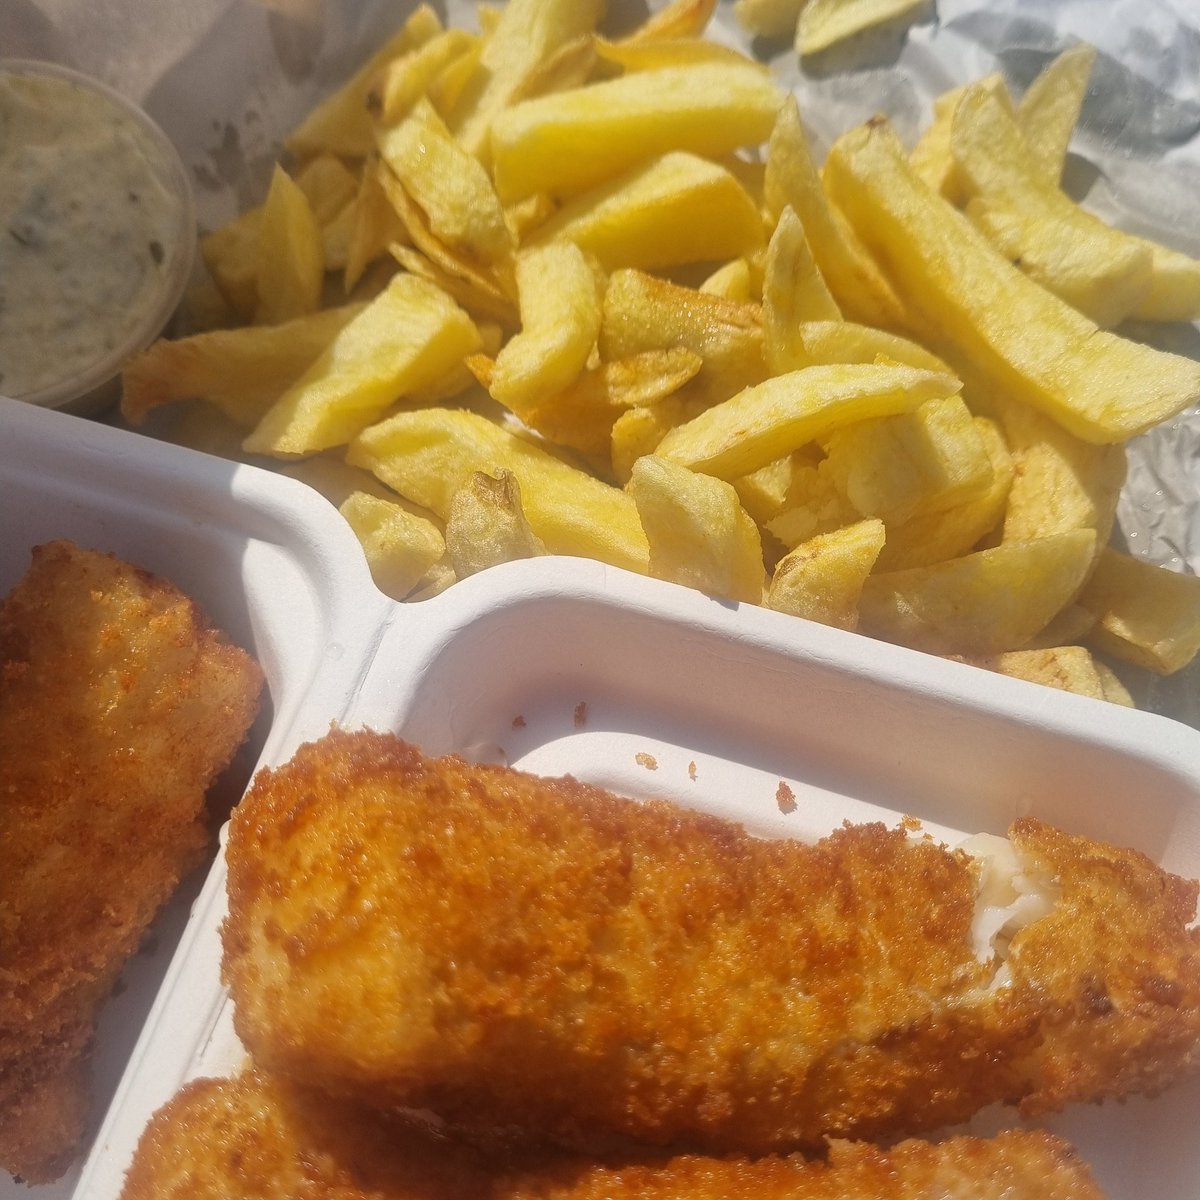 Fish and chips in Kilmore Quay #Wexford